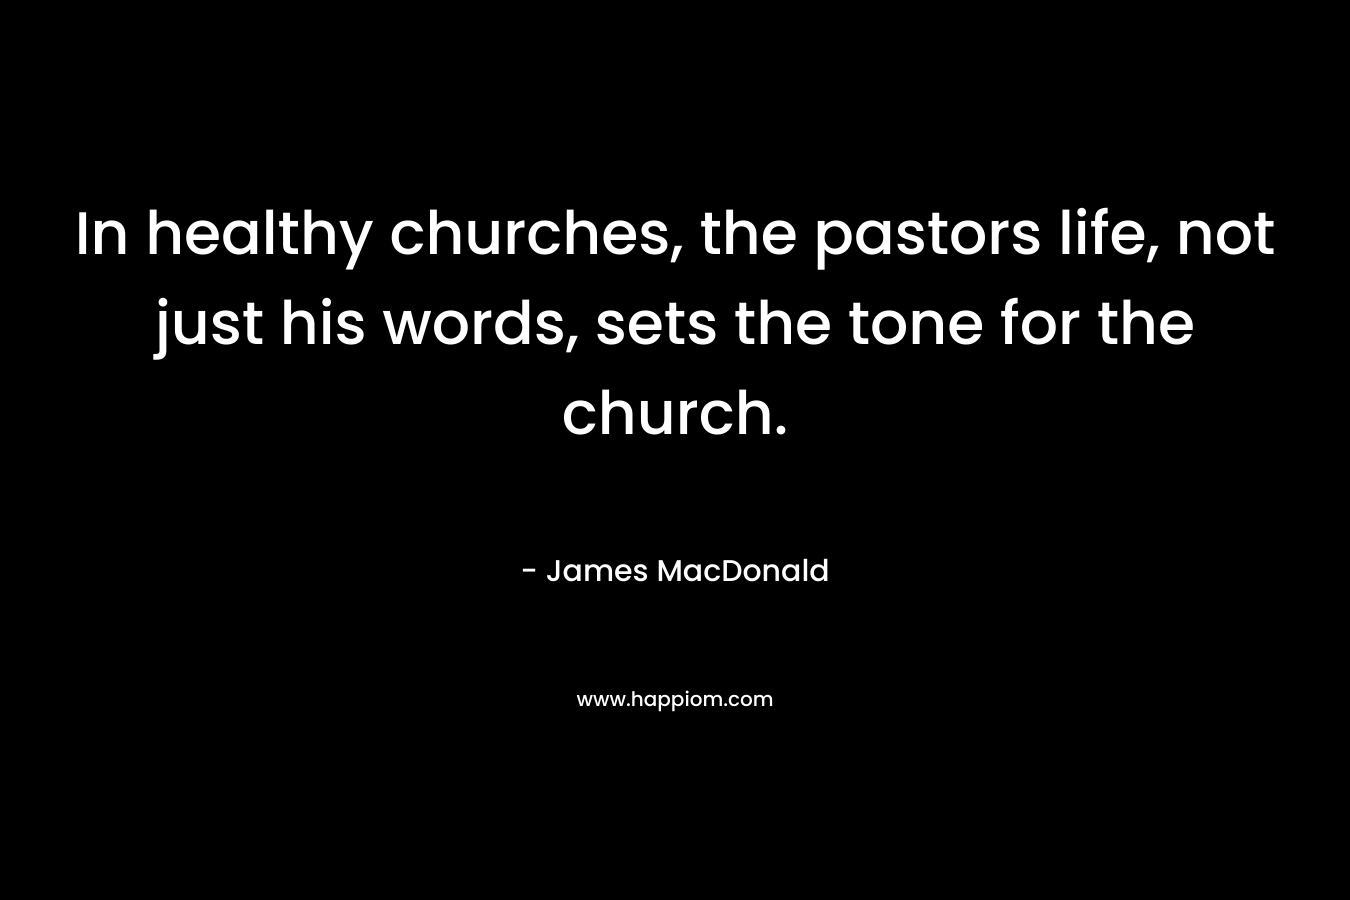 In healthy churches, the pastors life, not just his words, sets the tone for the church. – James MacDonald